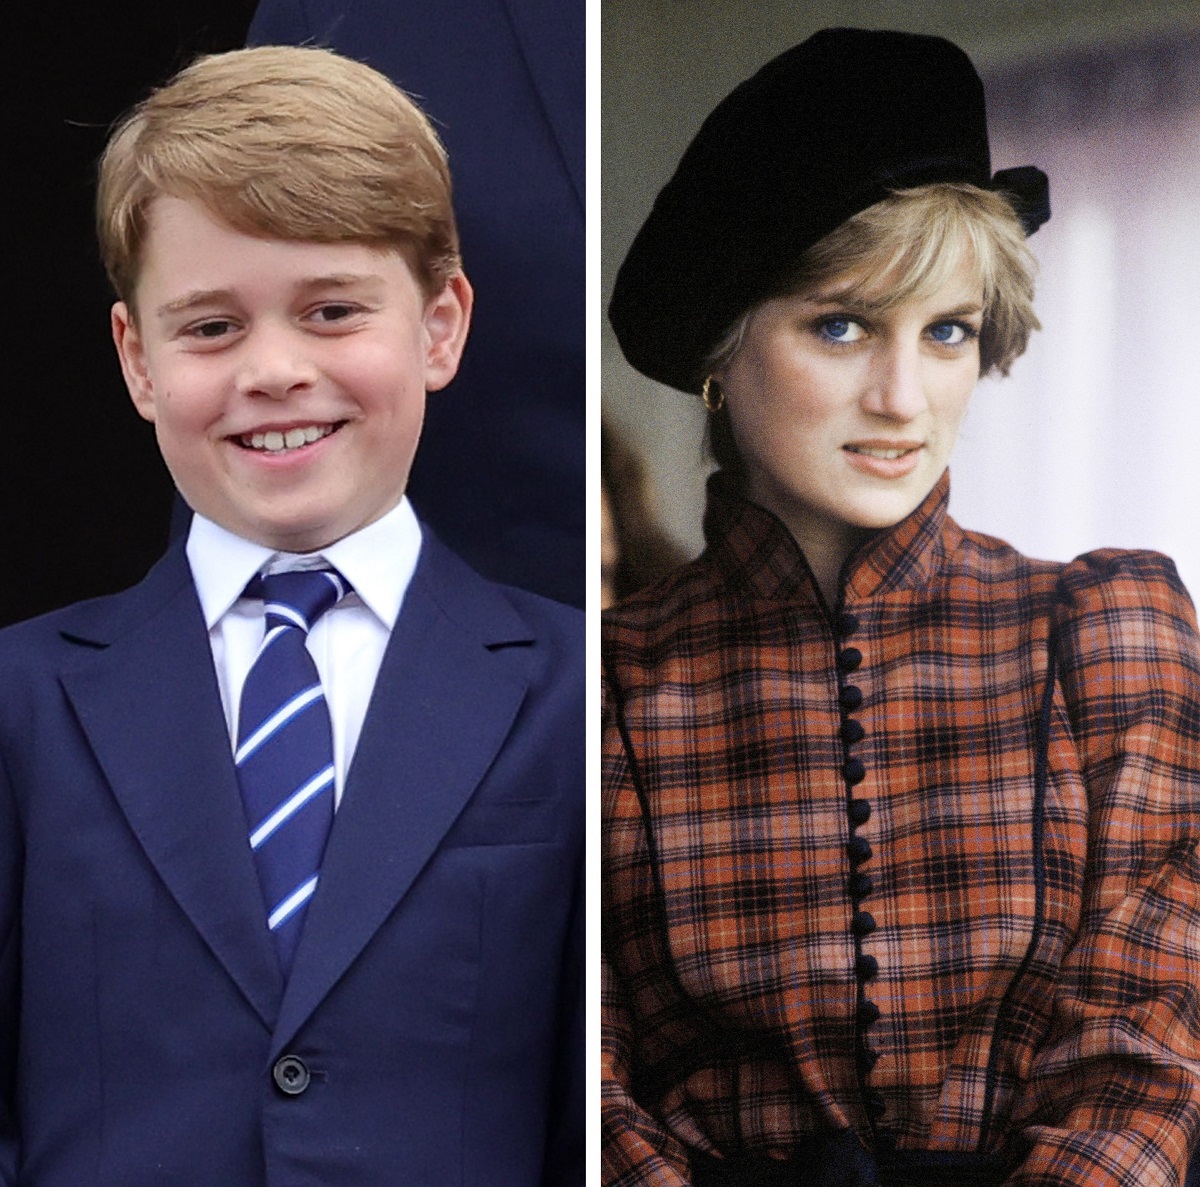 (L) Prince George, who as seen in a video inherited a look mannerisms from his late grandmother, (R) Princess Diana during a royal event (circa 1981)